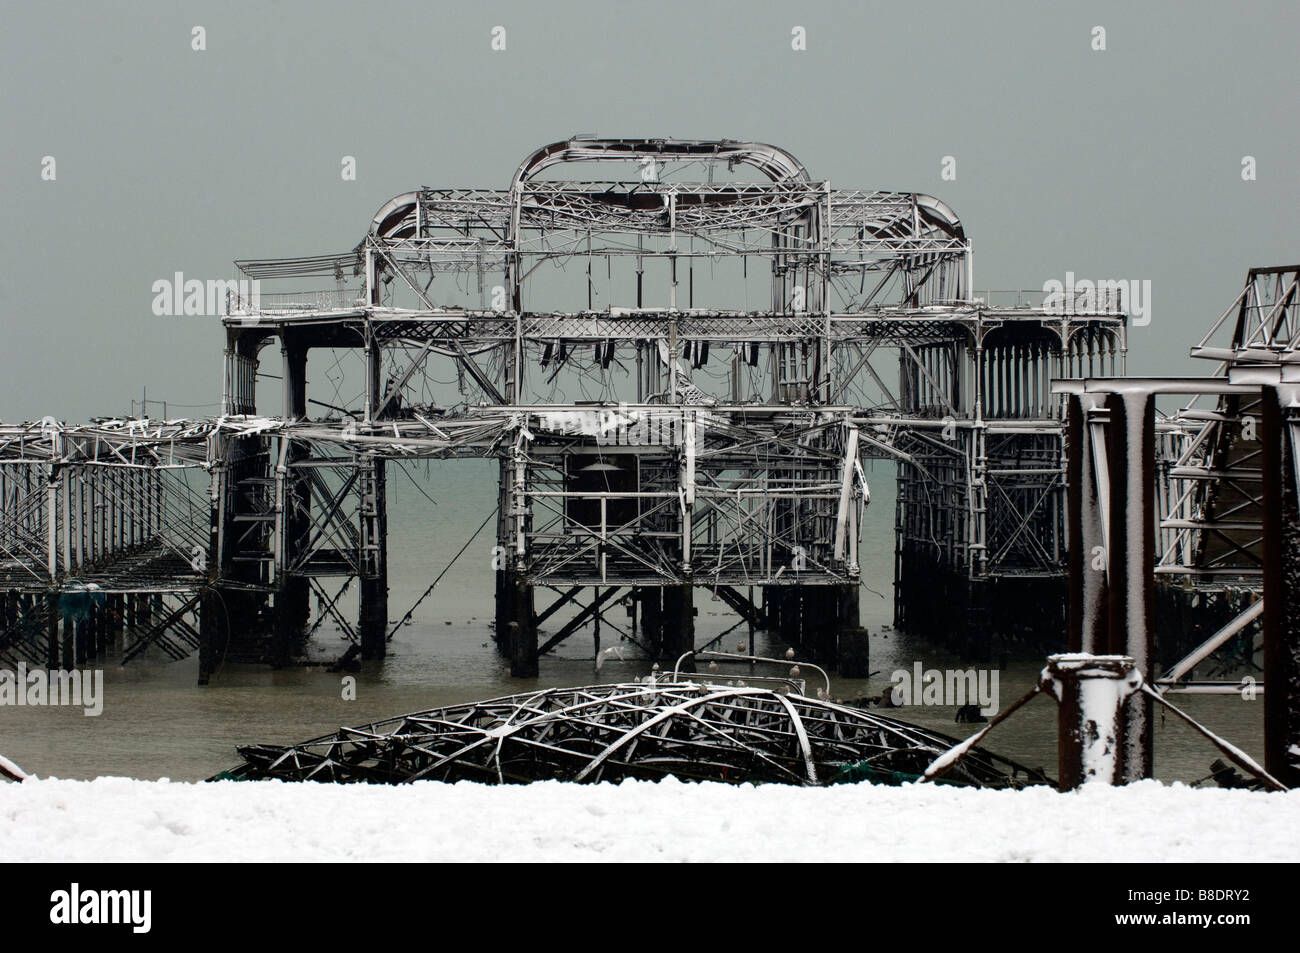 Snow covers the ruin of the West Pier off Brighton Beach, Sussex, on a winters day. Stock Photo